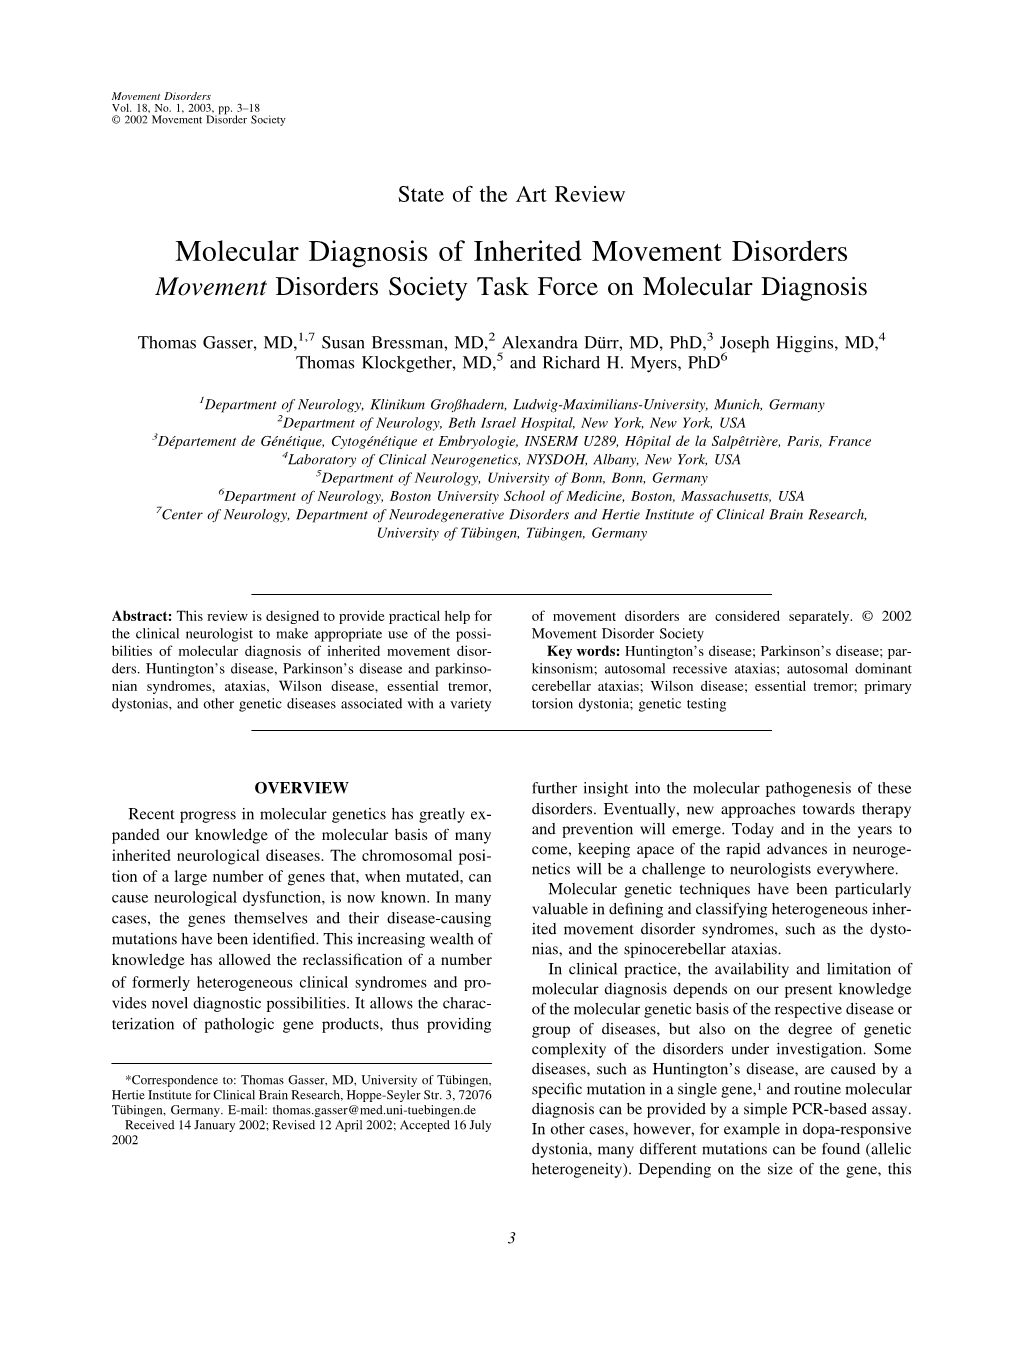 Molecular Diagnosis of Inherited Movement Disorders Movement Disorders Society Task Force on Molecular Diagnosis